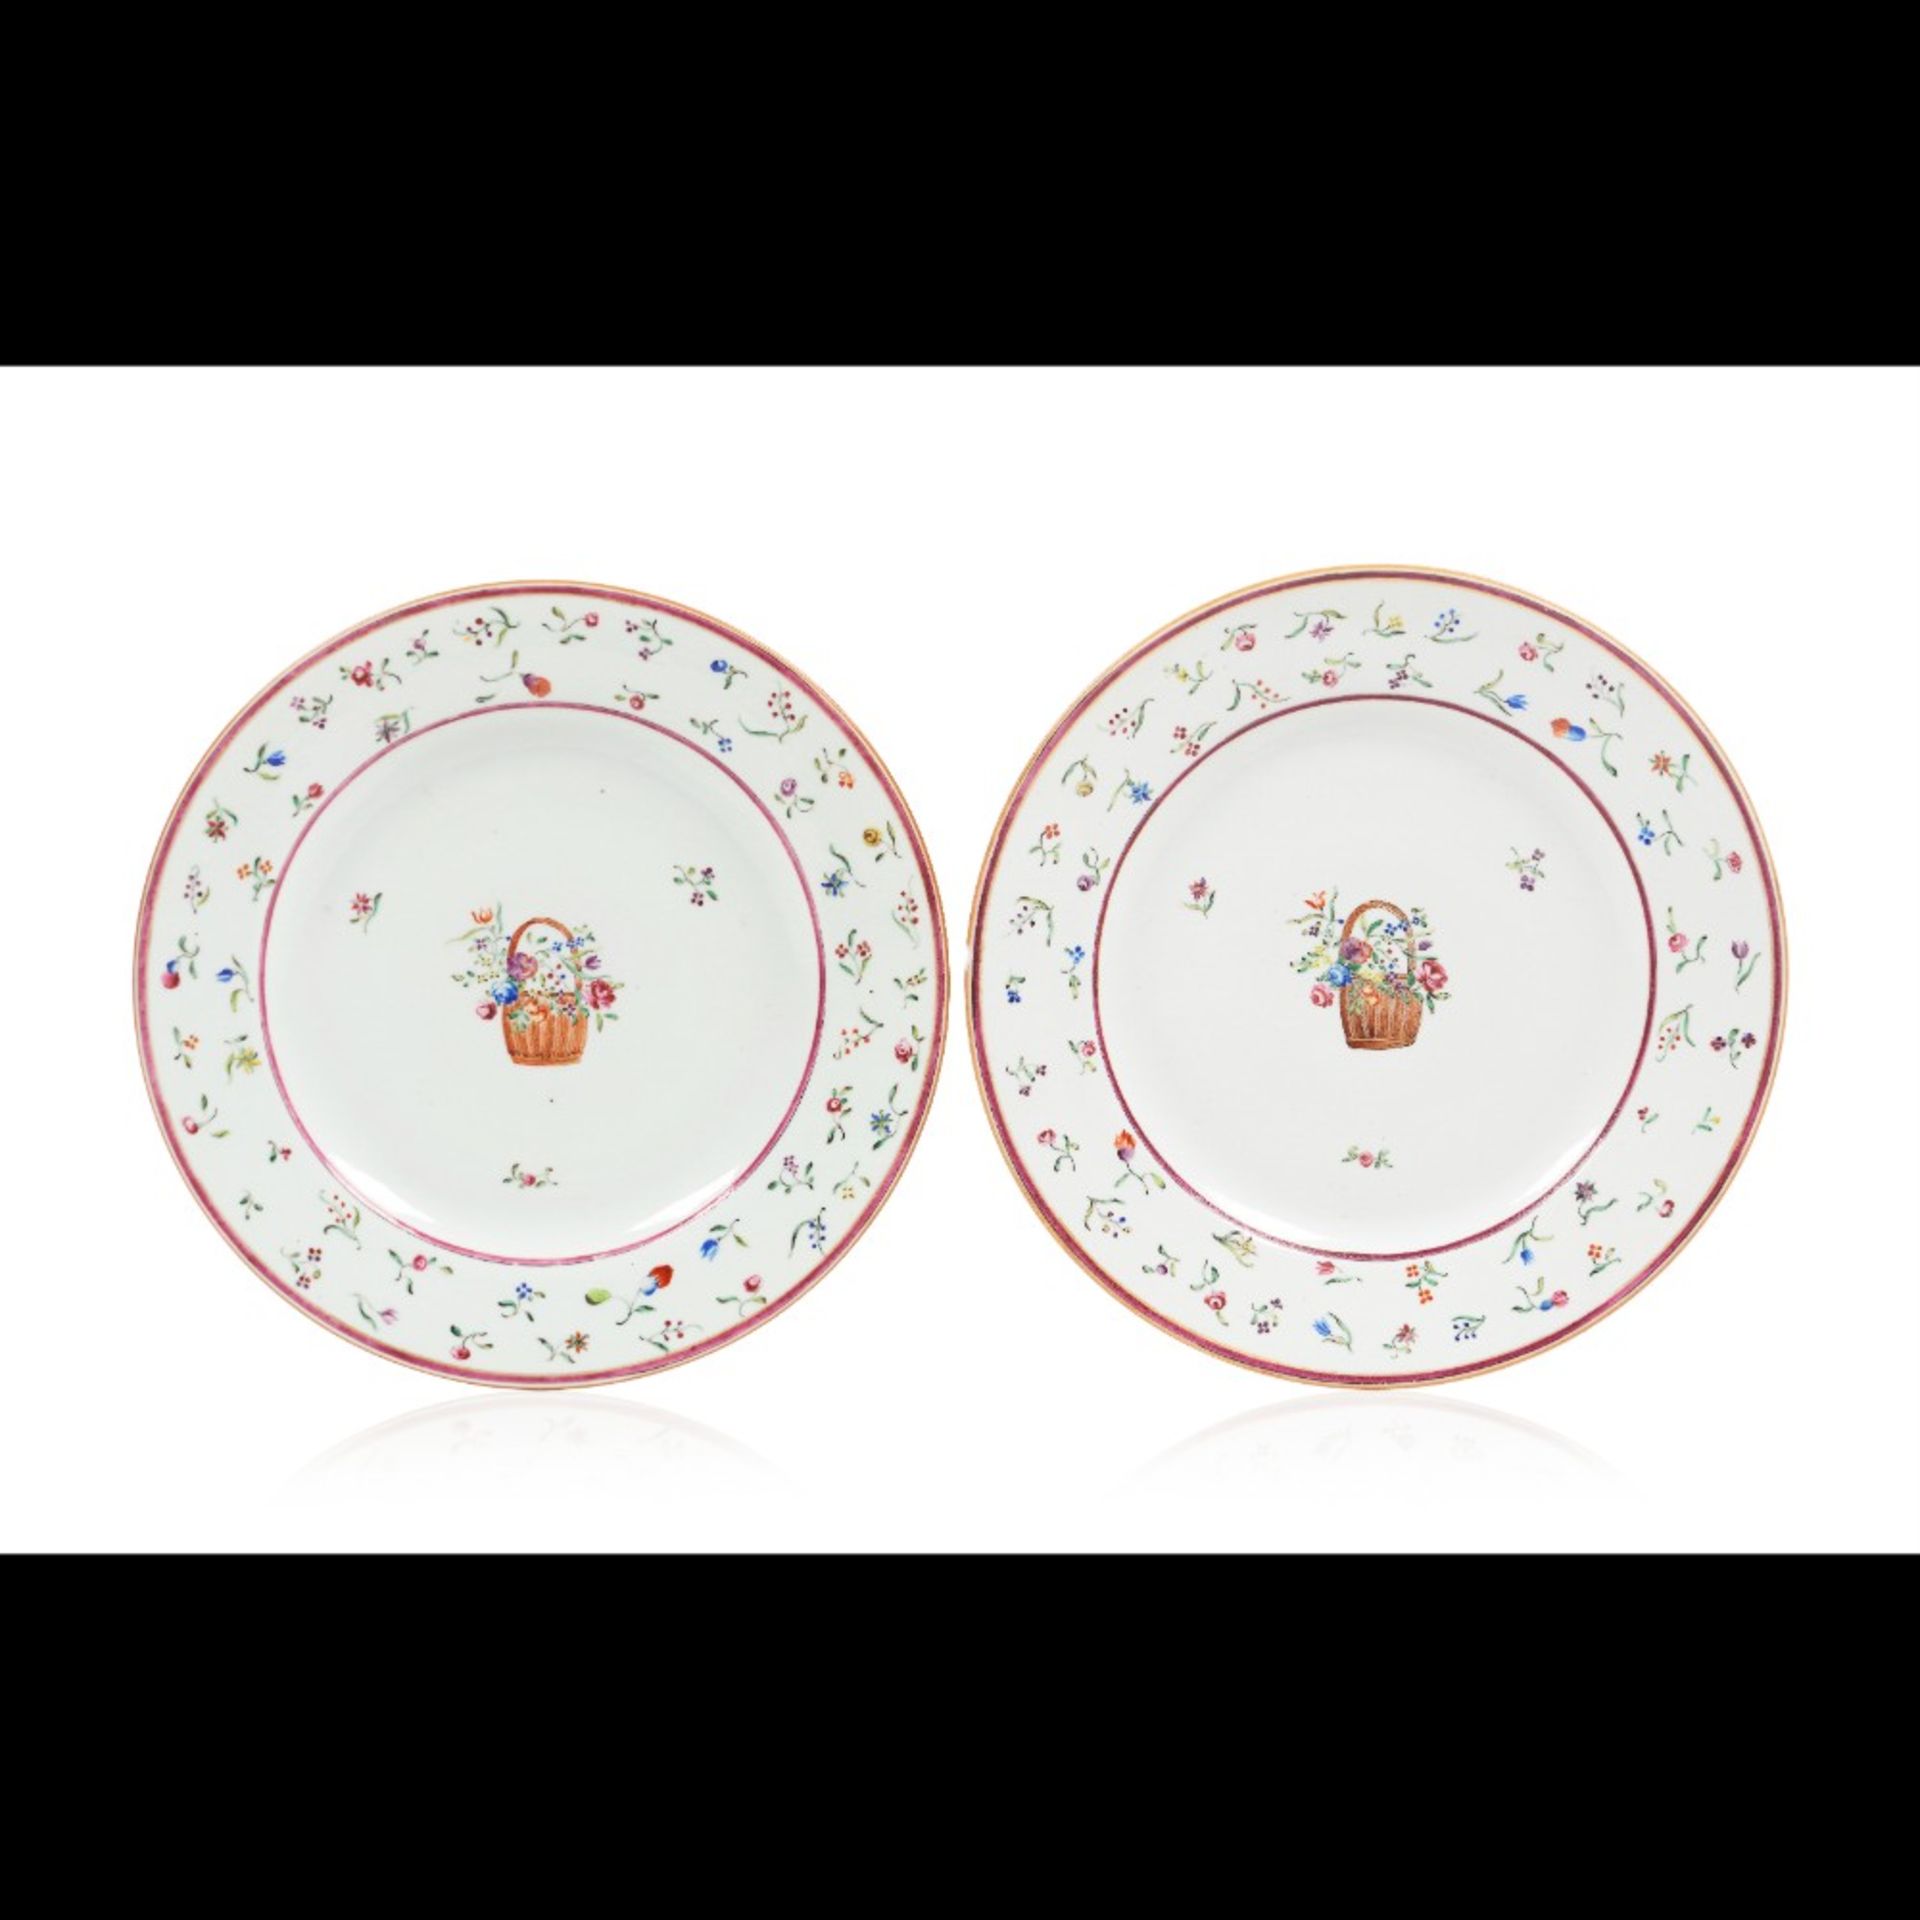  A pair of plates